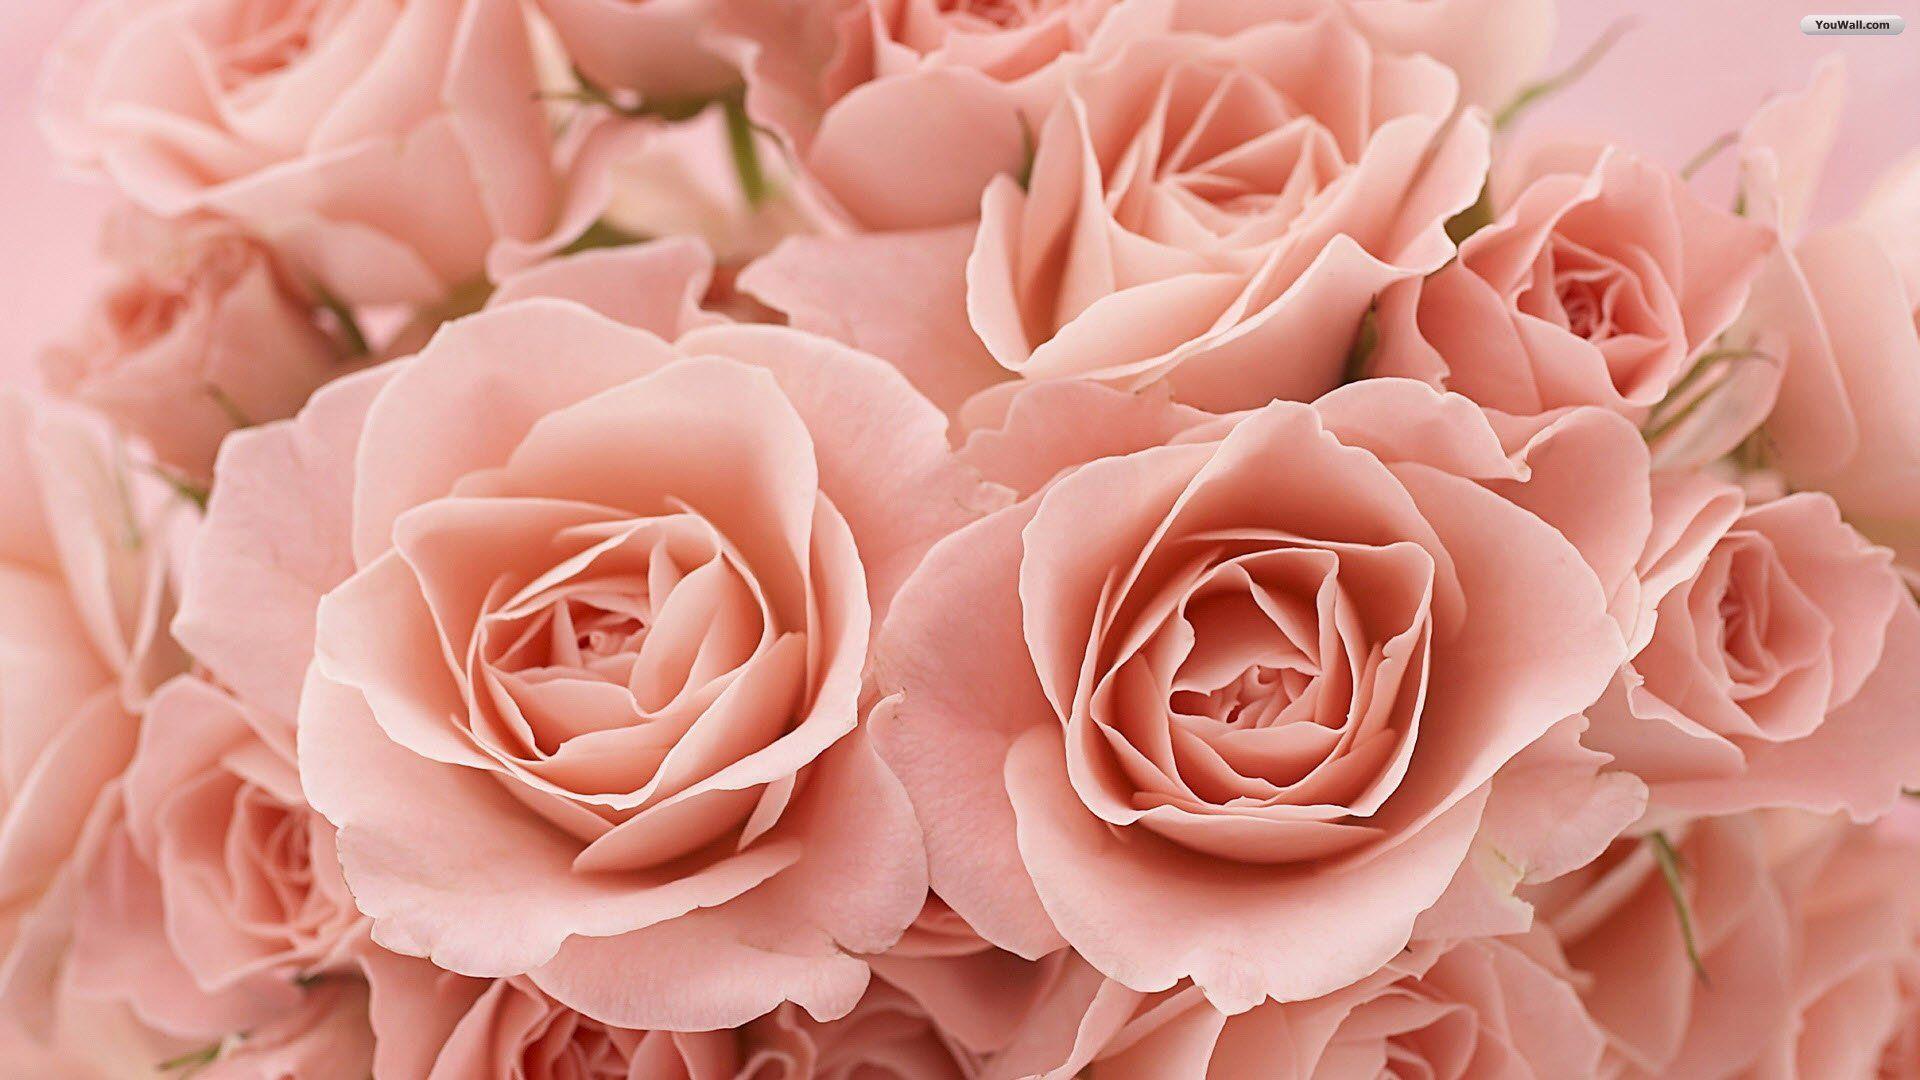 Light Pink Roses Wallpapers - Top Free Light Pink Roses Backgrounds